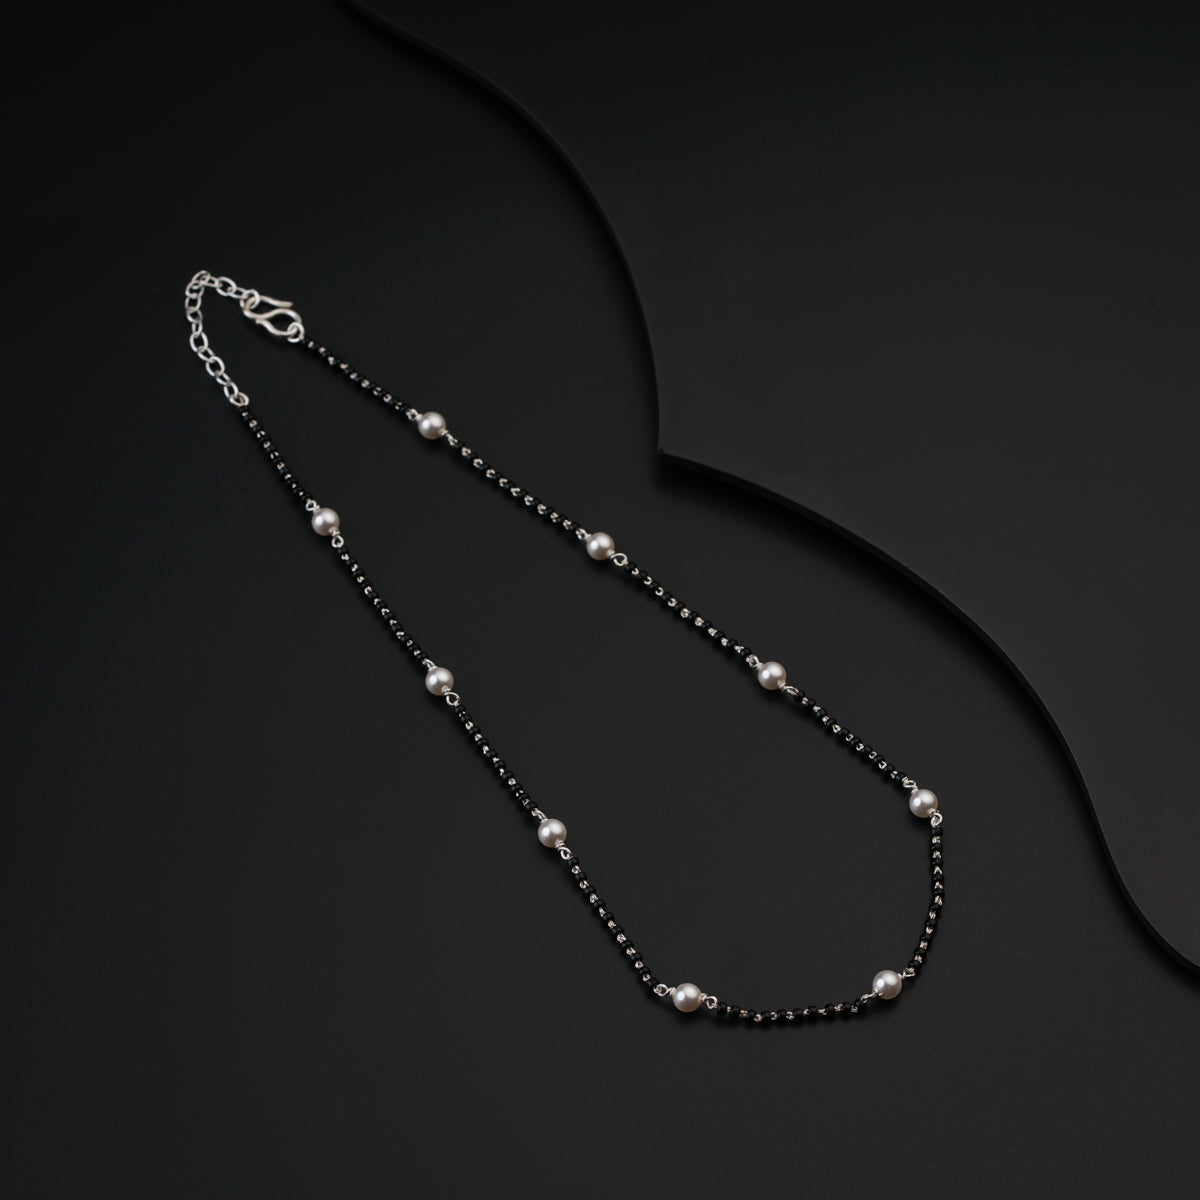 a black beaded necklace on a black surface